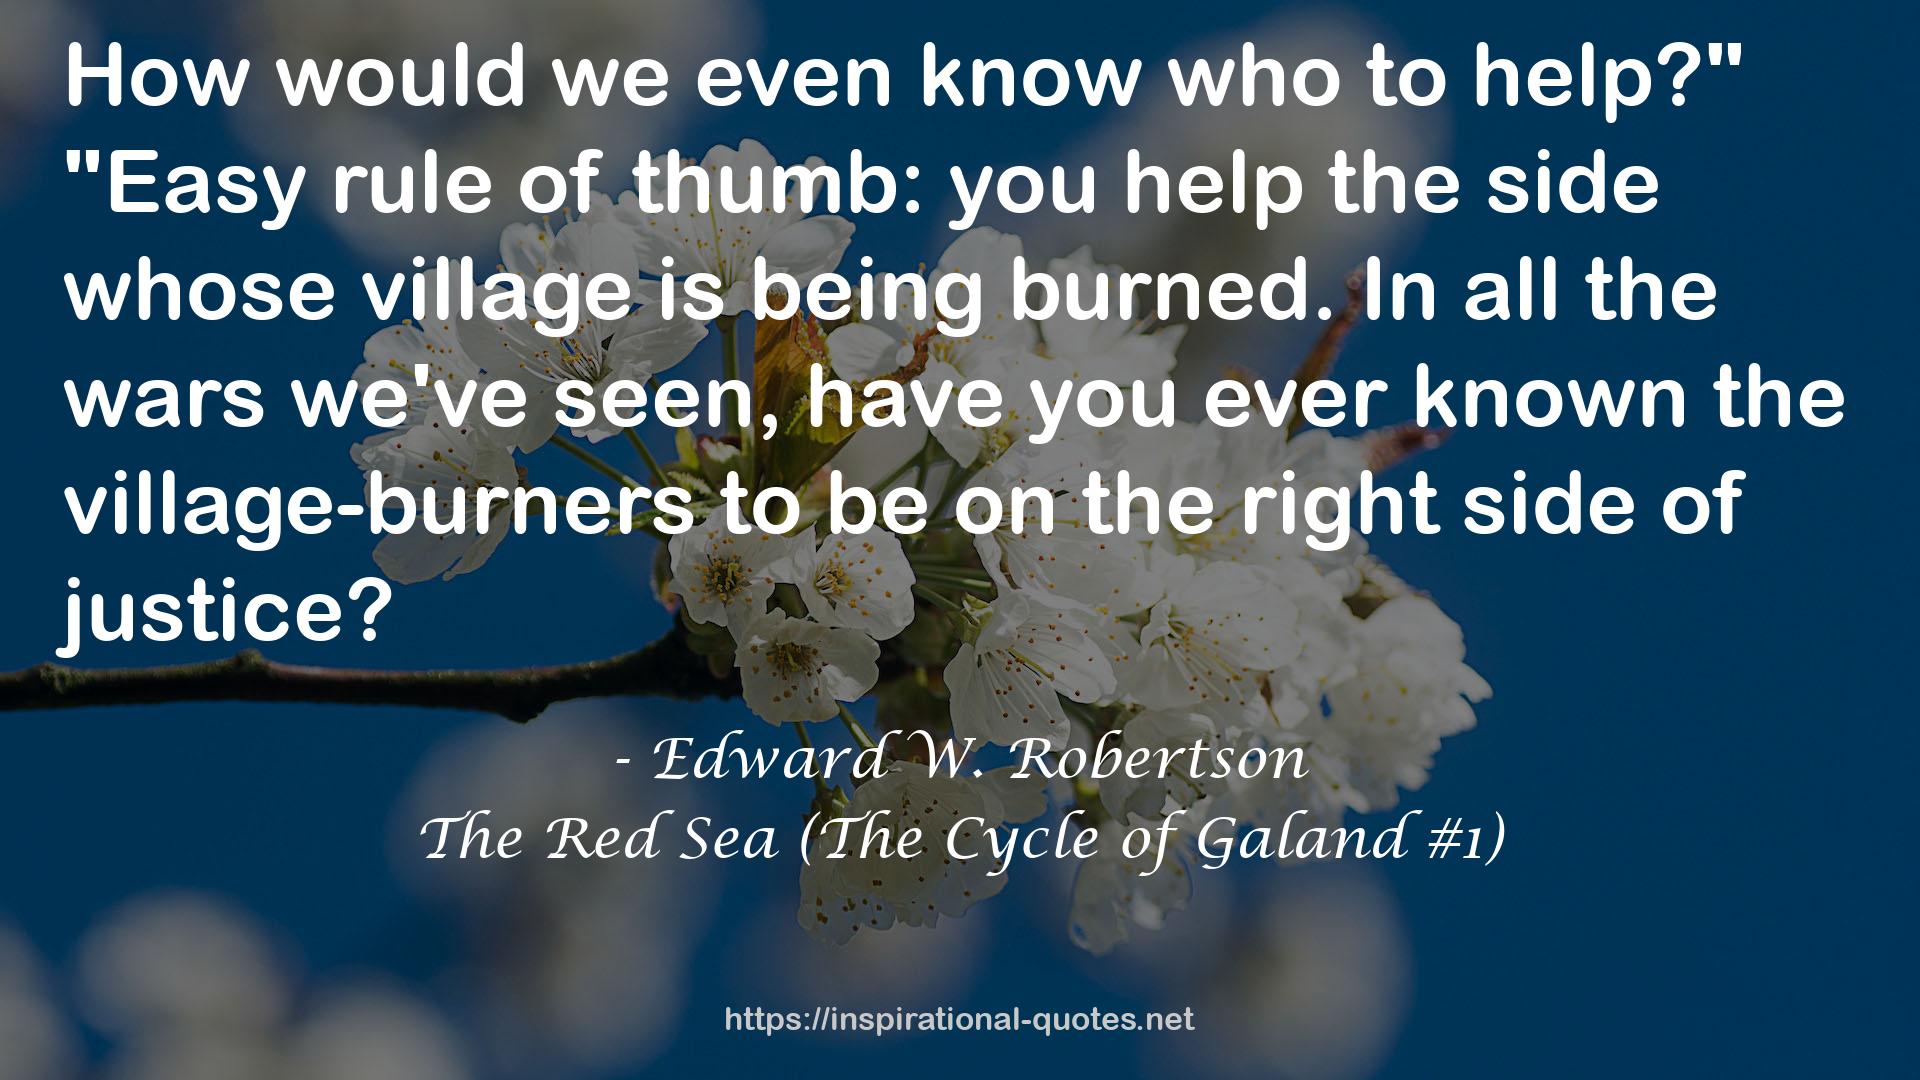 The Red Sea (The Cycle of Galand #1) QUOTES